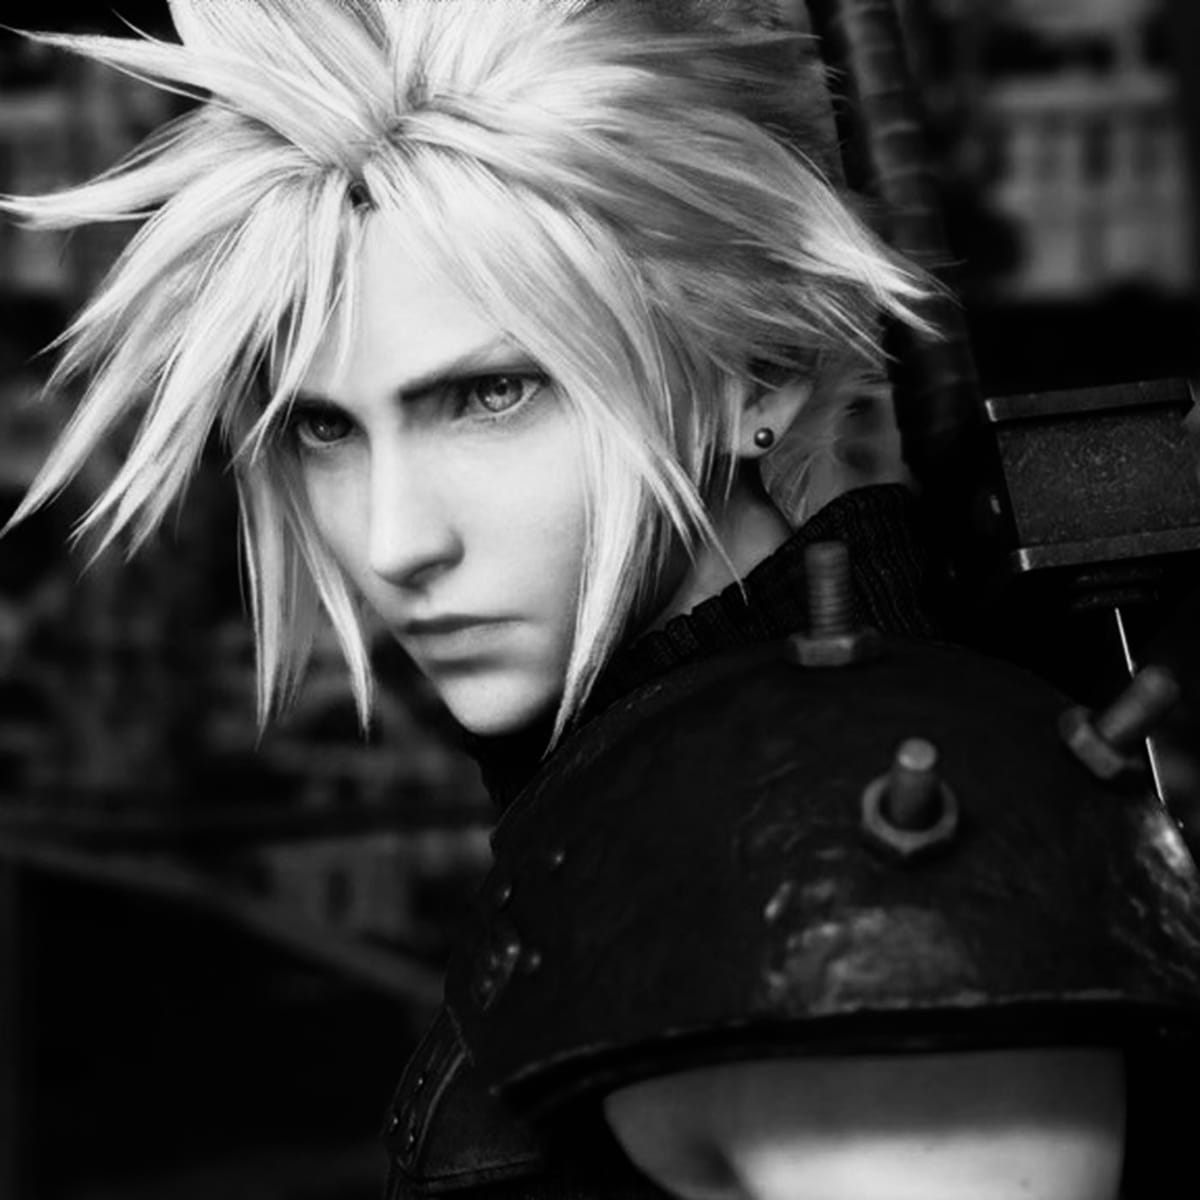 Some Thoughts on the Aesthetics of Final Fantasy VII Remake